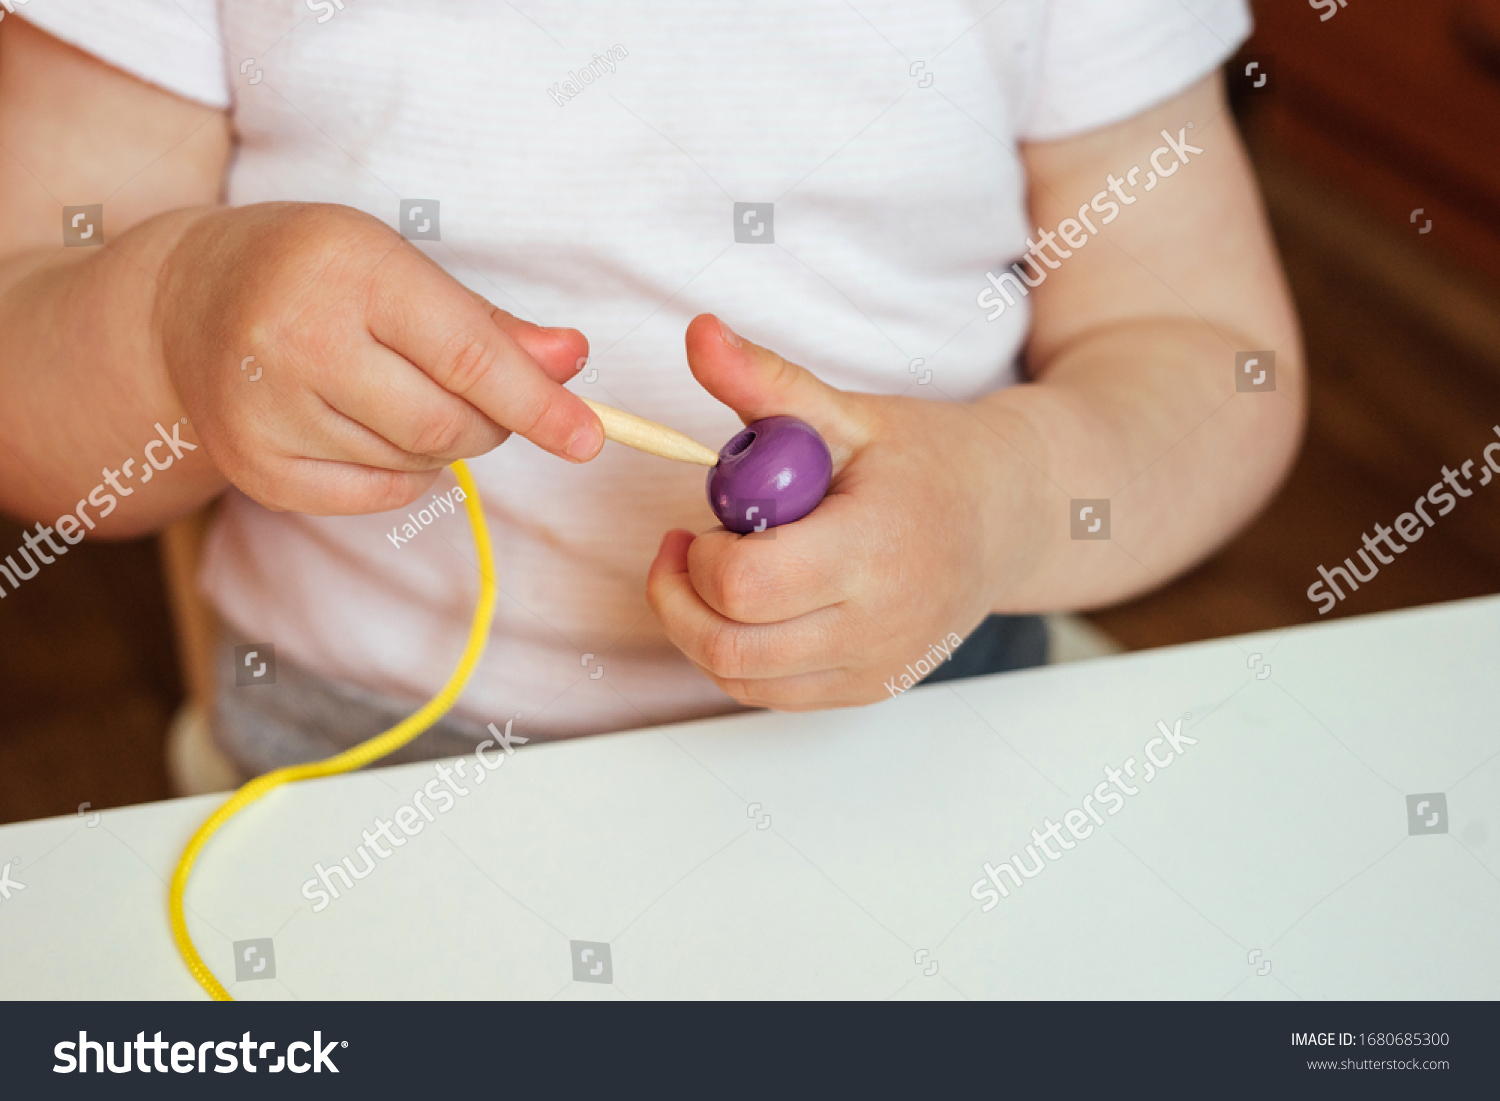 Child putting beads on a string. Bead stringing activity. Fine motor skills development. Early education, Montessori Method. Cognitive skills, children development. Close up of baby's hands. #1680685300